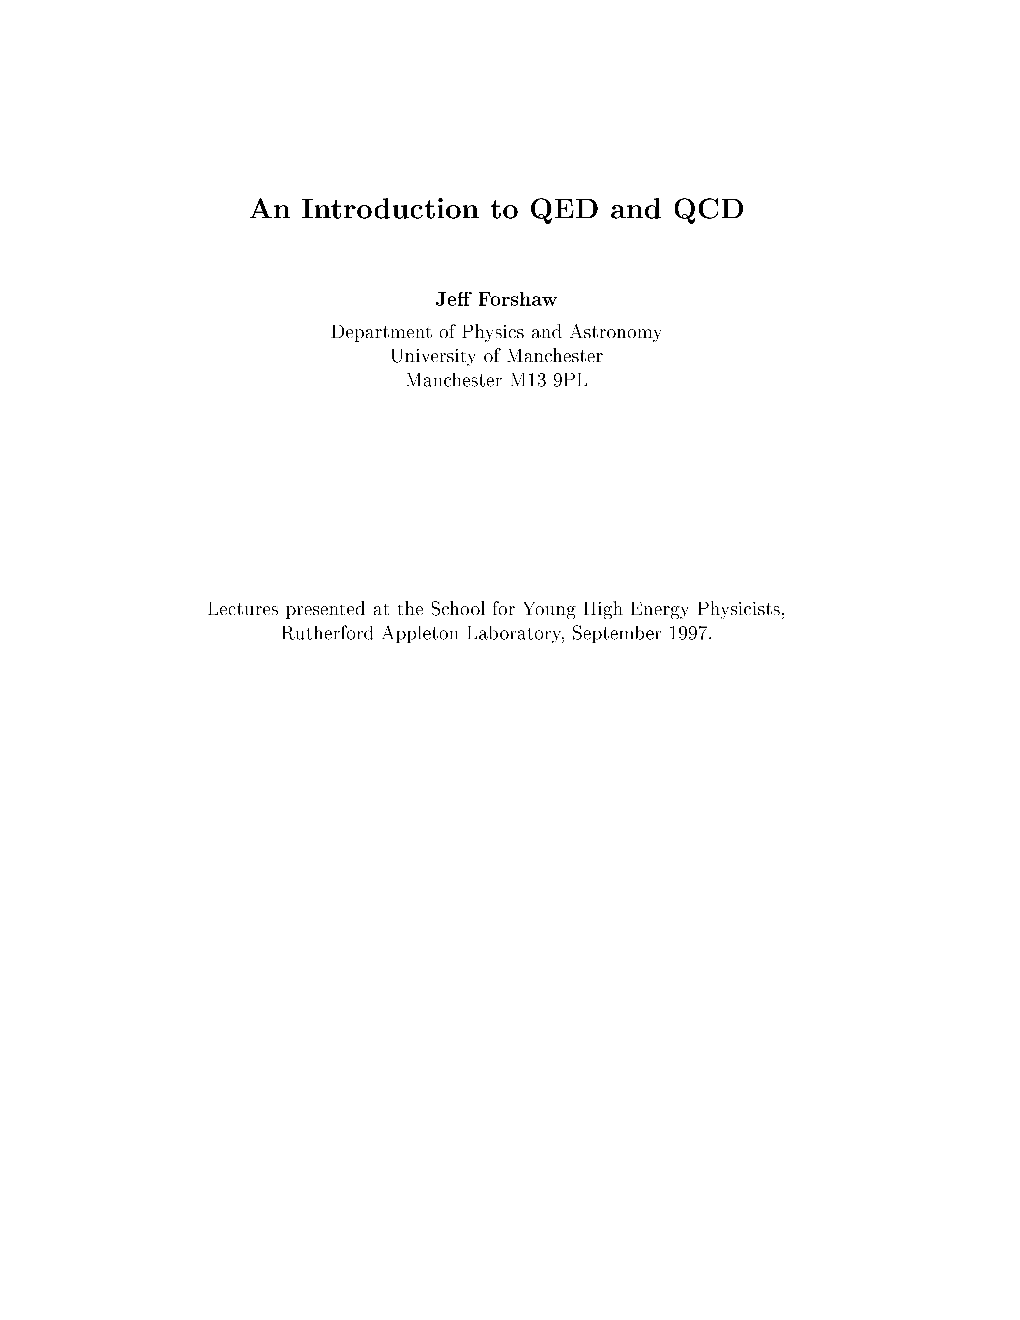 An Introduction to QED And